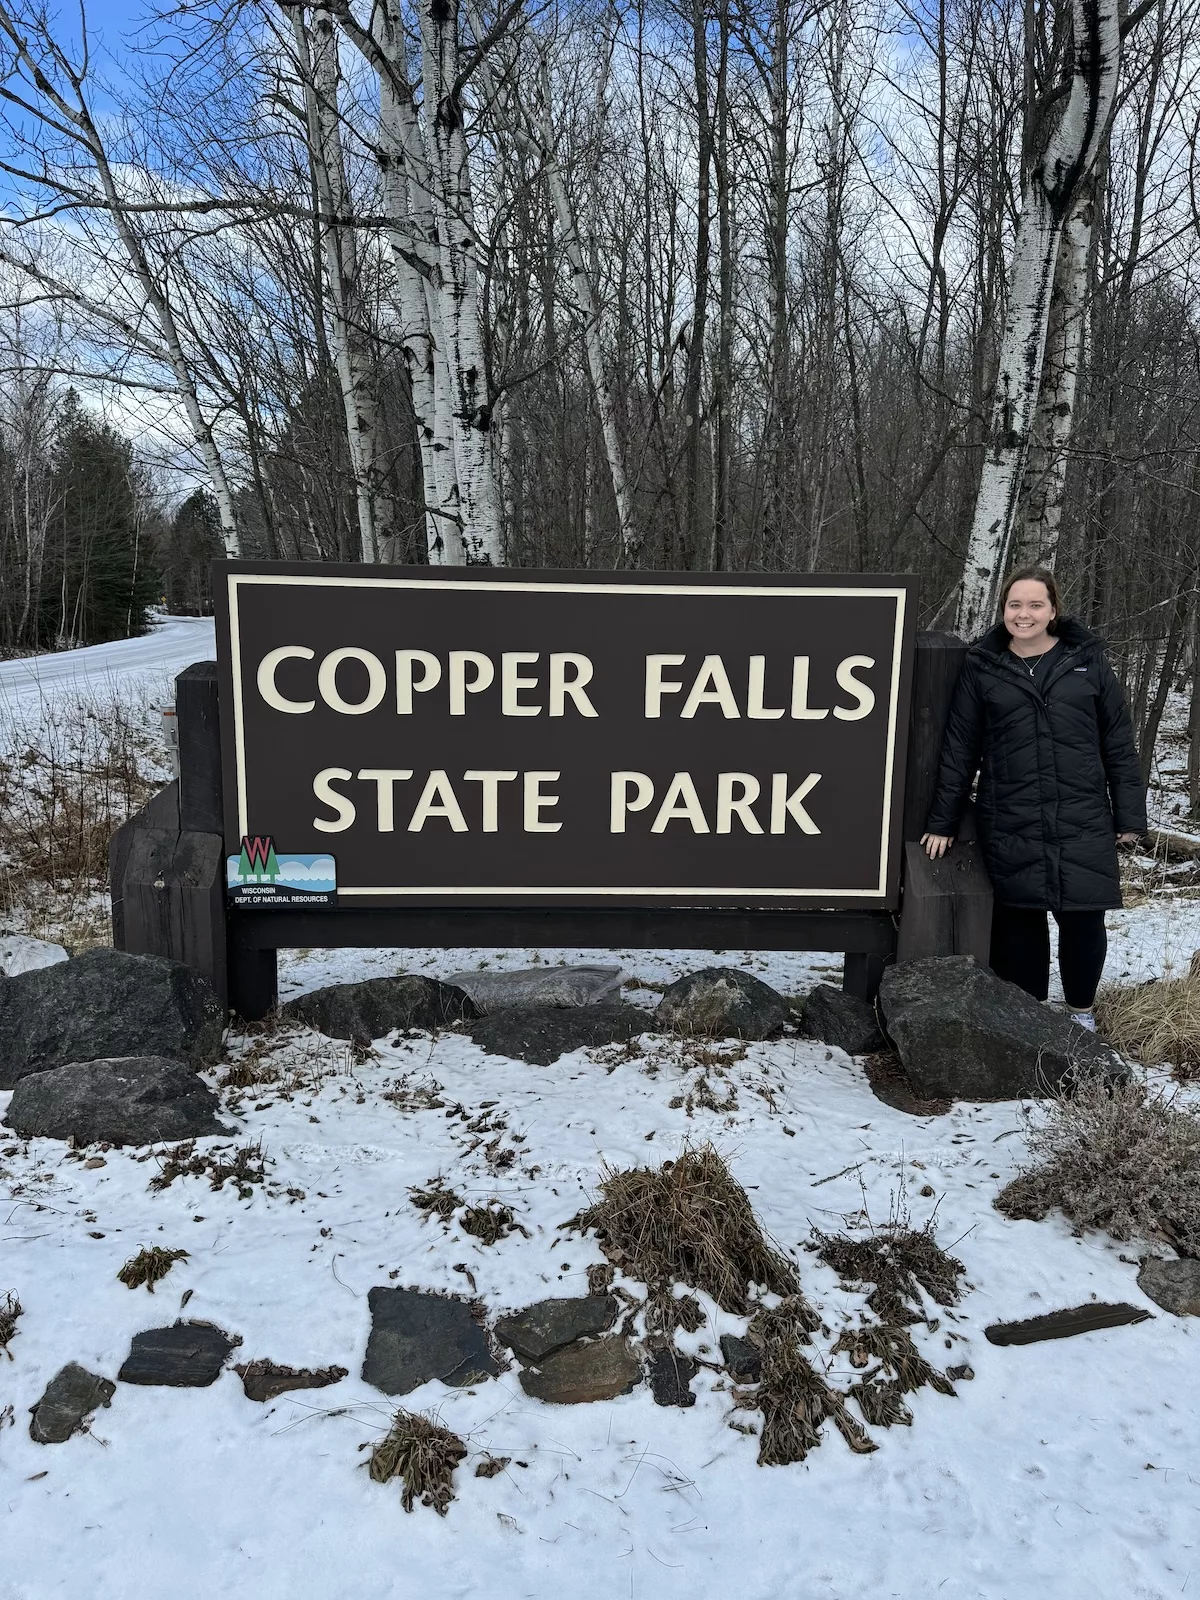 Guide to Copper Falls State Park - Image of woman posing next to state park entrance sign
